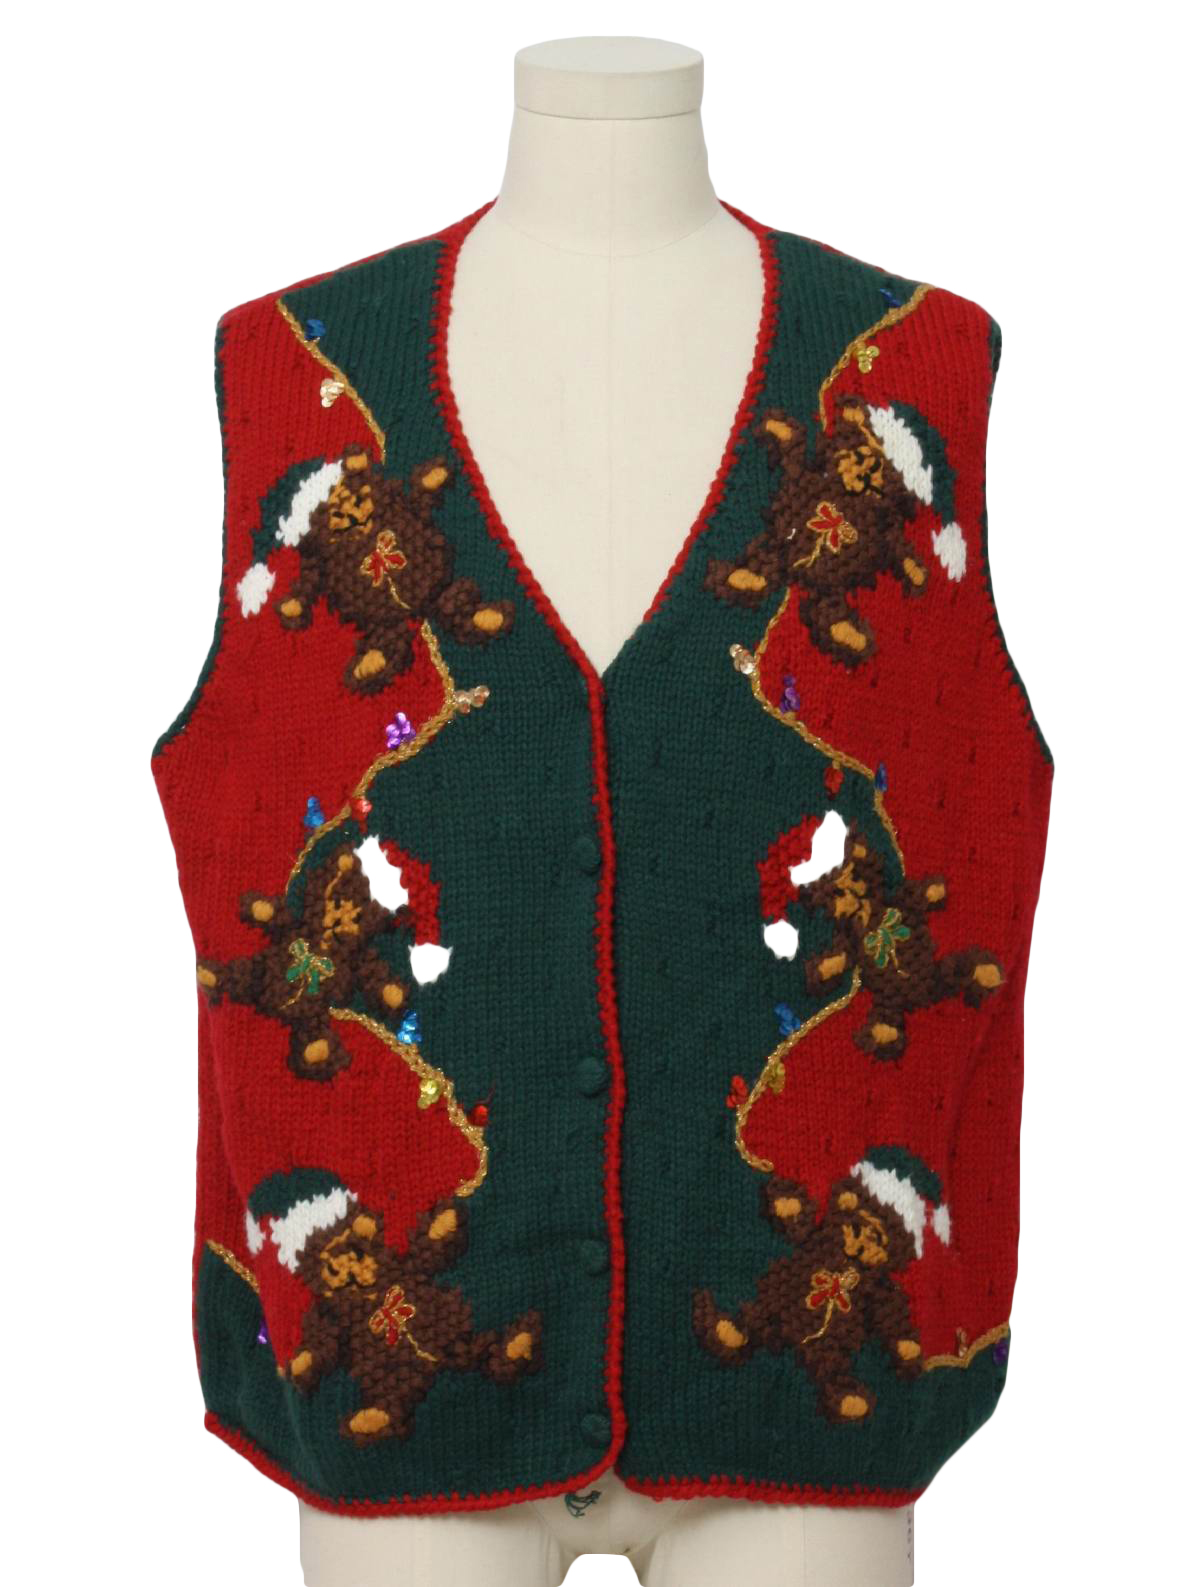 Bear-riffic Ugly Christmas Sweater Vest: retro look -Hastings and Smith ...